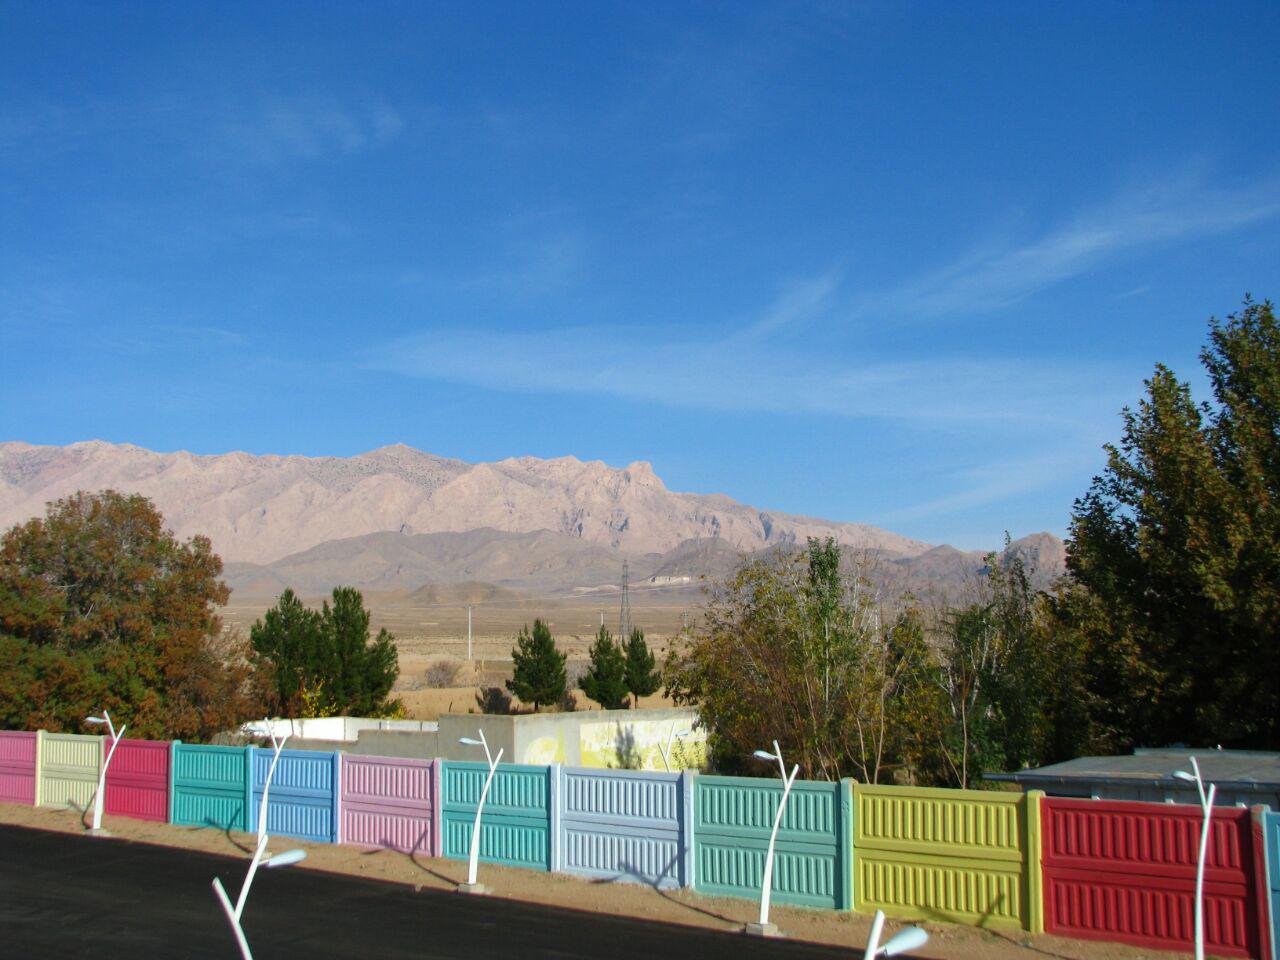 Colorful entrance wall of the camp